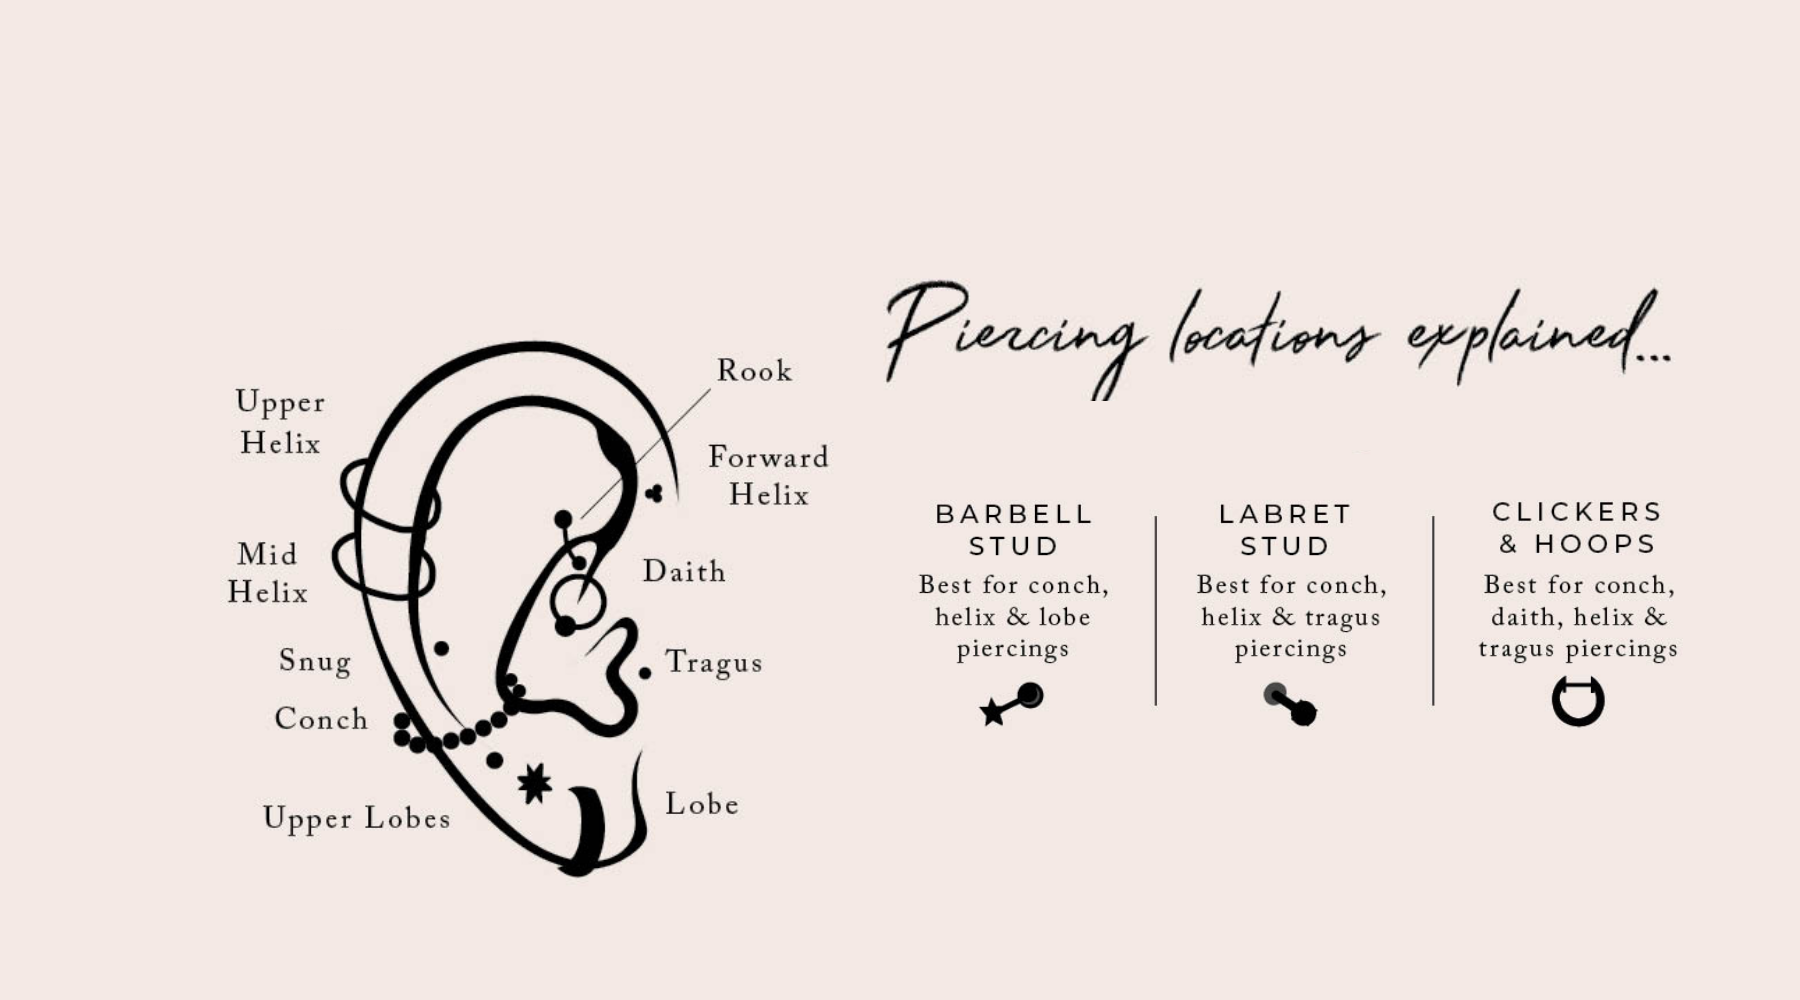 Piercing Locations Explained